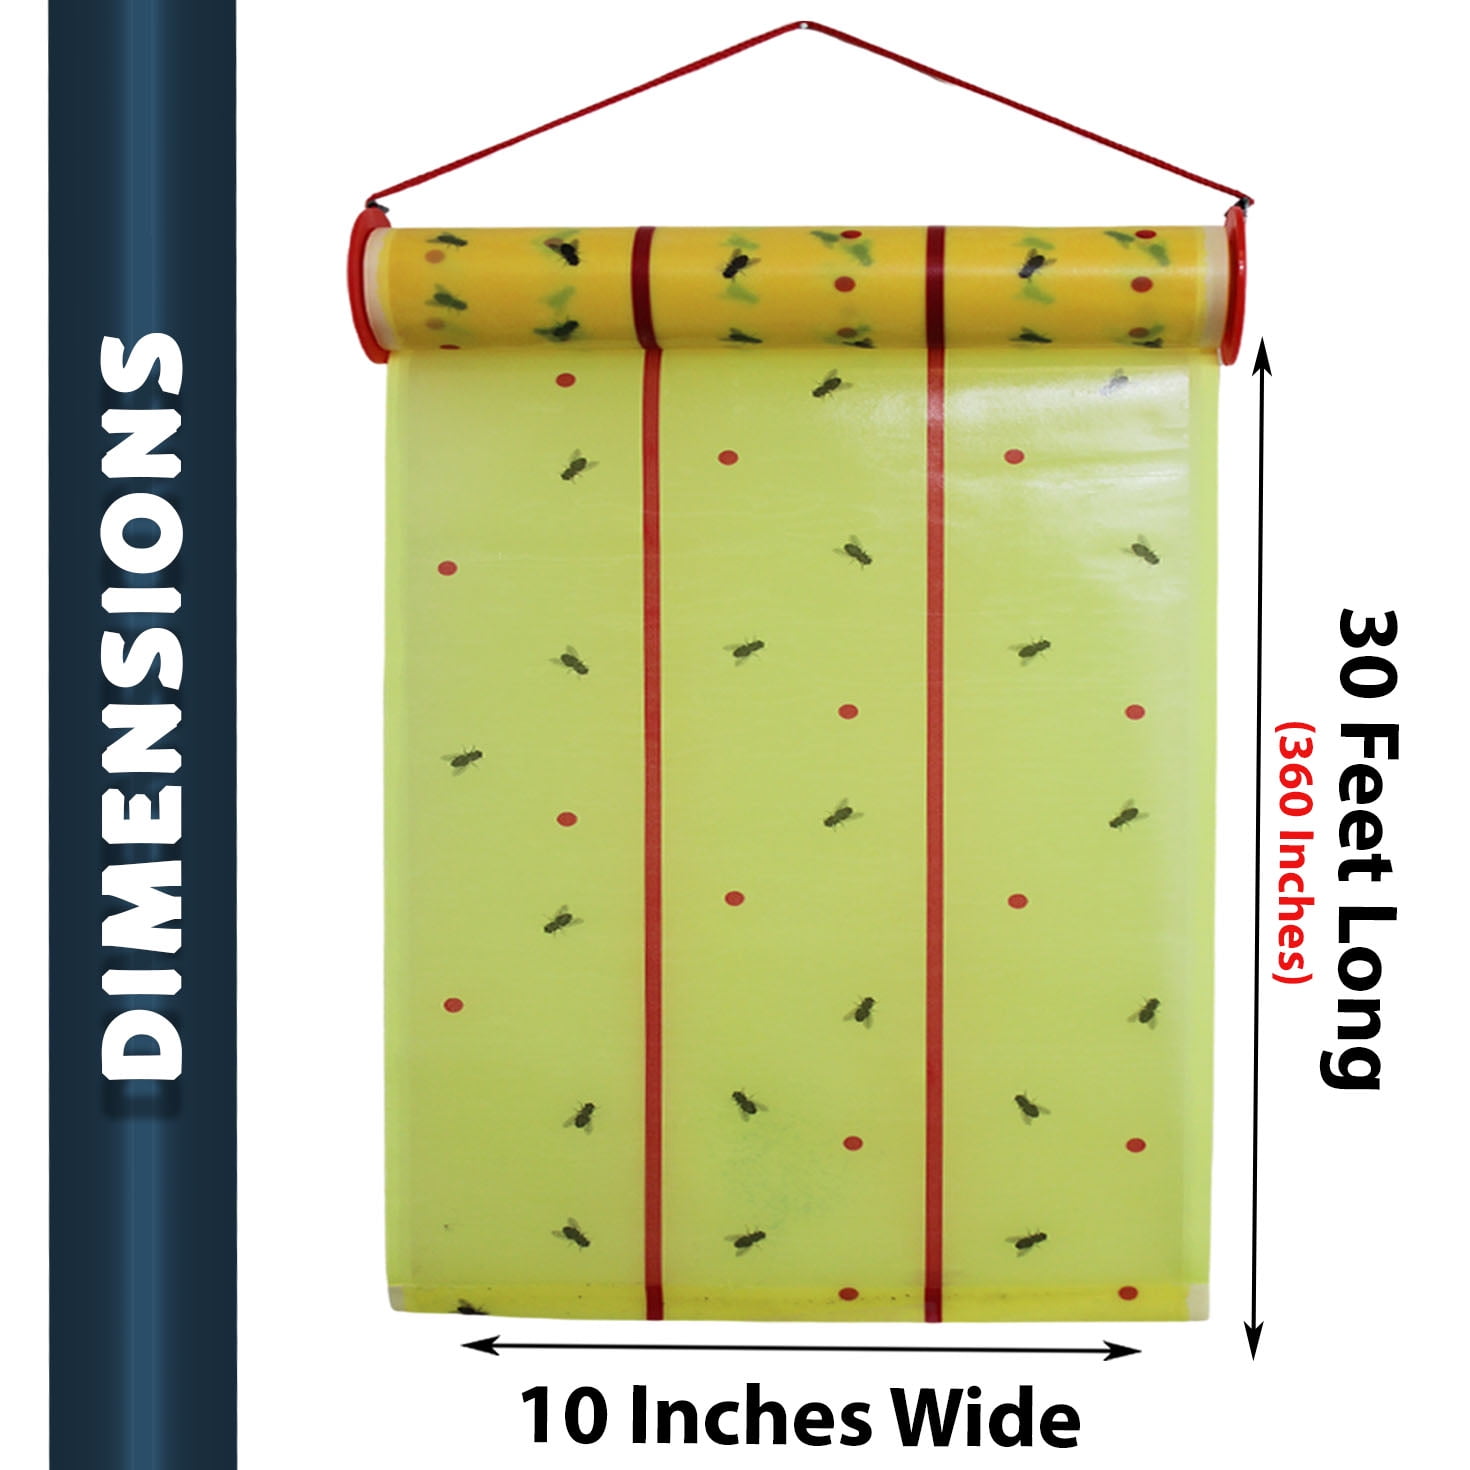  Qualirey 15 Rolls Sticky Fly Traps Outdoor 30 ft Giant Fly  Traps for Indoors Sticky Fly Paper Strips Indoor Hanging Fly Tape Insect Fly  Paper Sheets Glue Bug Catcher Outdoor